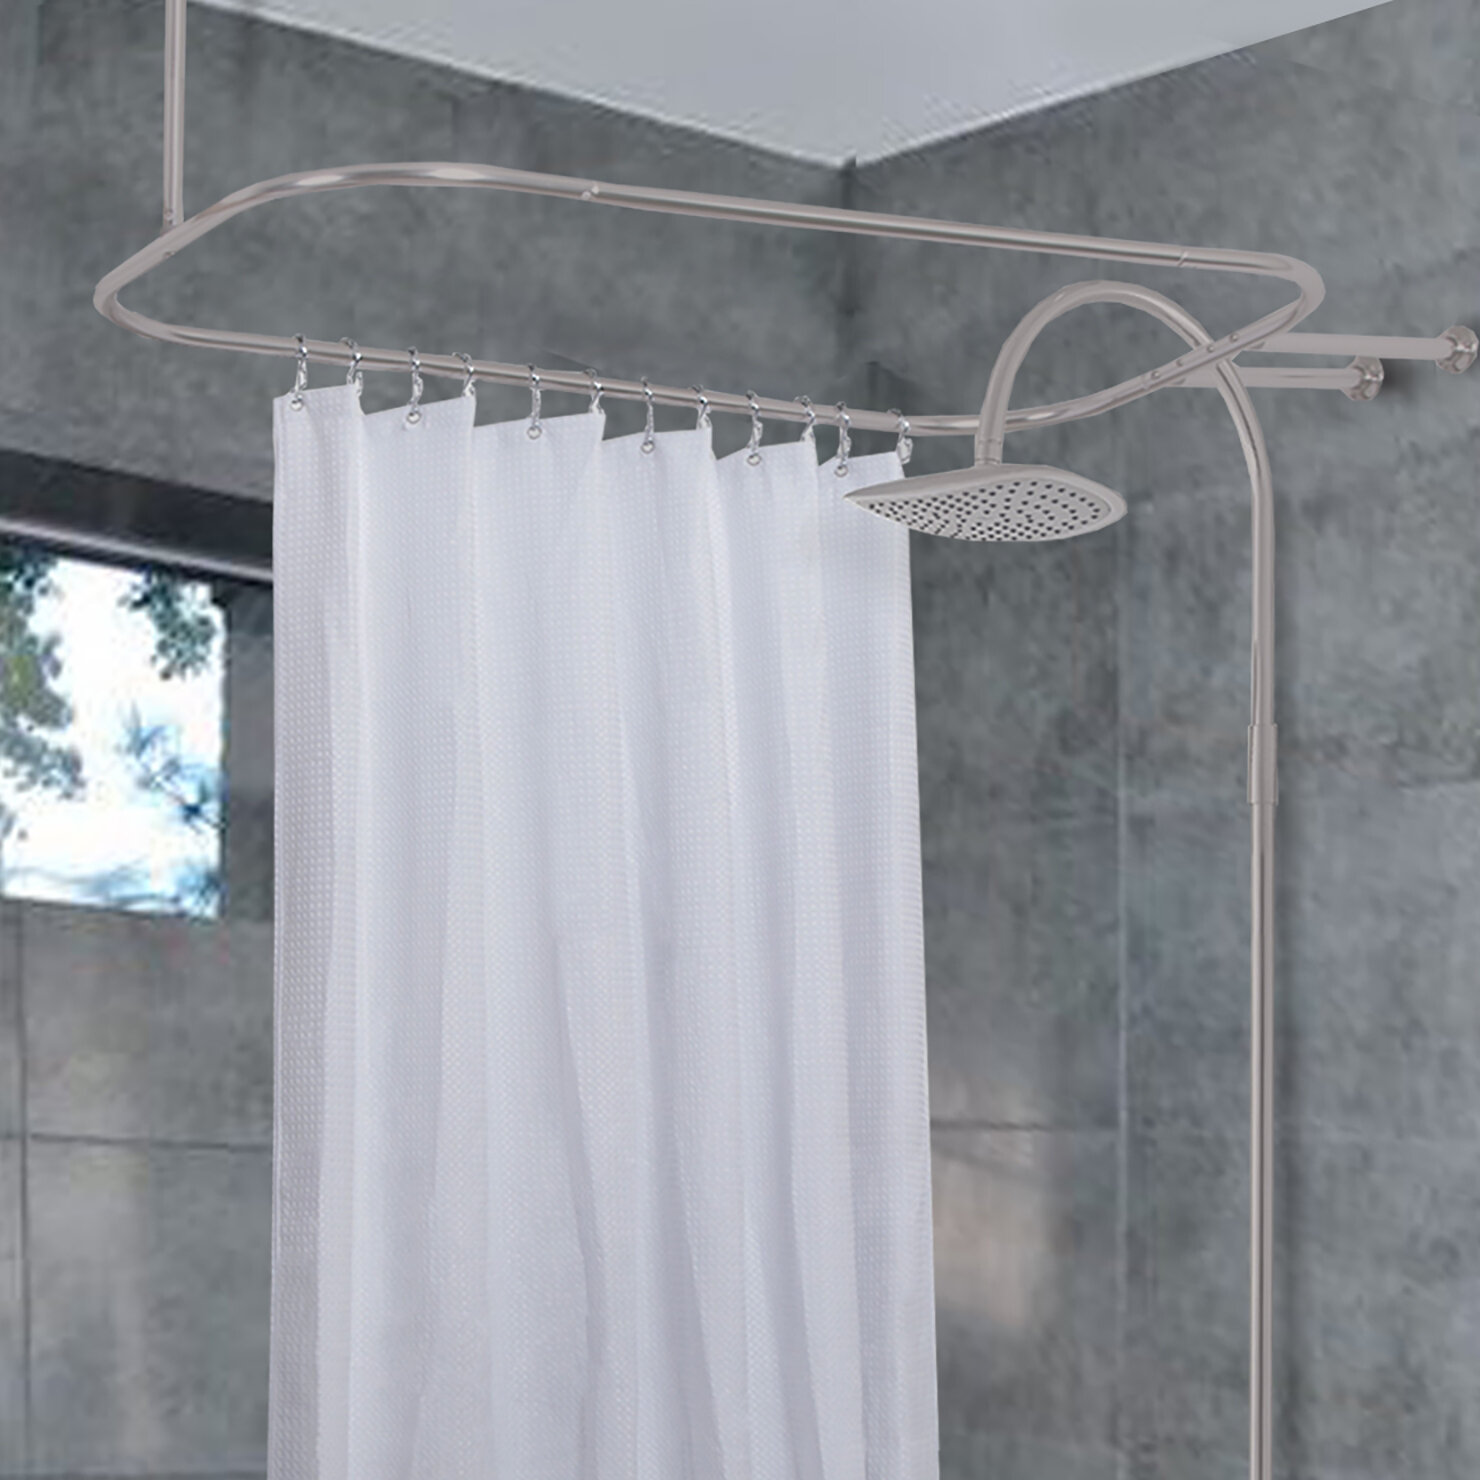 Never Rust Aluminum Hoop Shower Curtain Rod with 24 pcs Shower Curtain  Hooks, for Claw Foot Tubs, Free Standing Tubs, Sliver Color